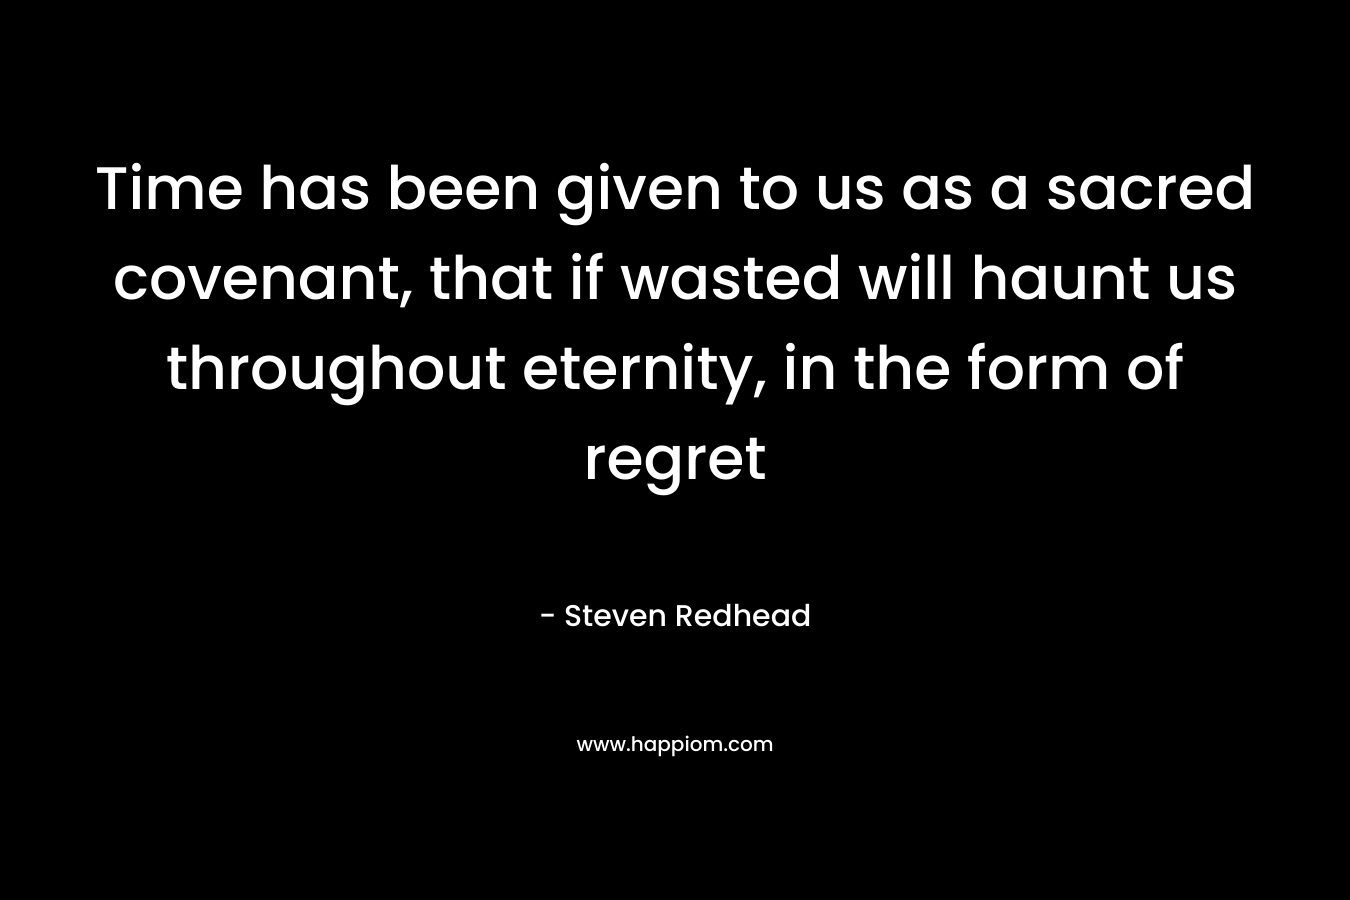 Time has been given to us as a sacred covenant, that if wasted will haunt us throughout eternity, in the form of regret – Steven Redhead